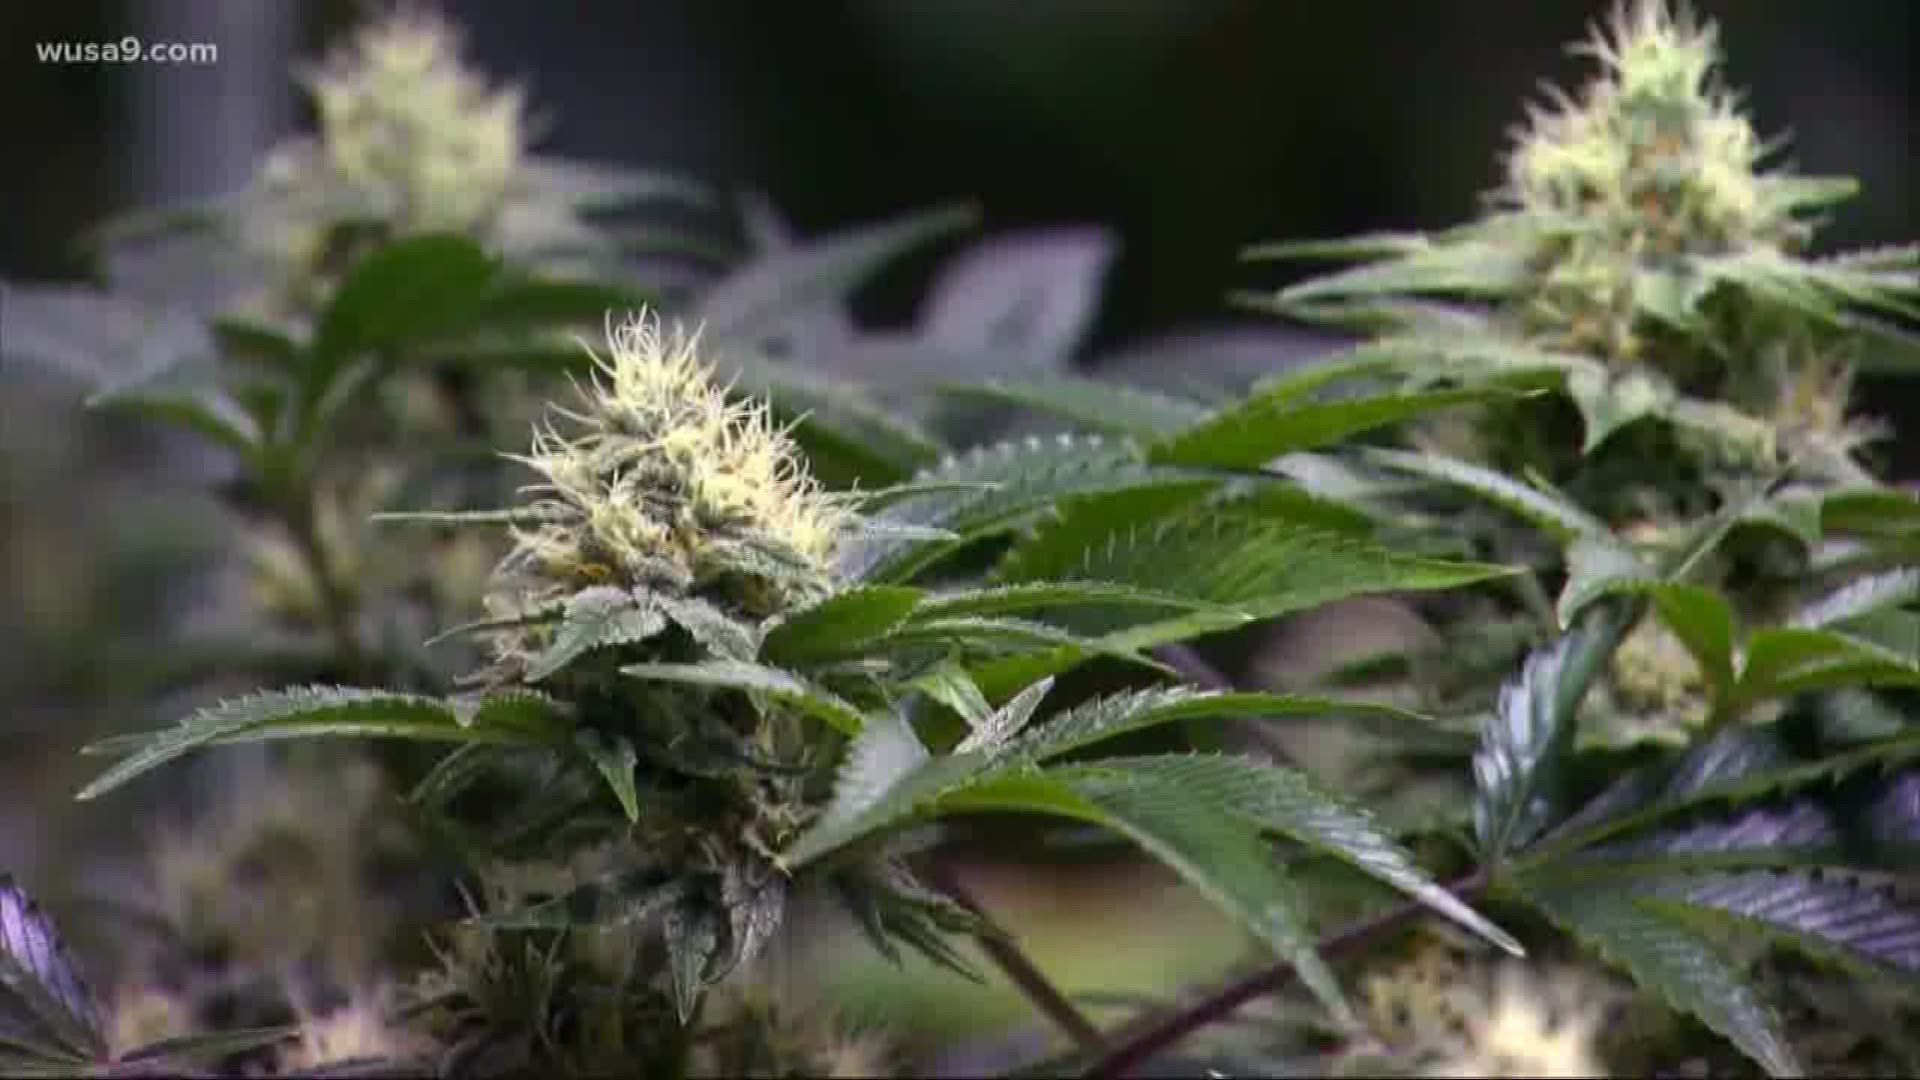 Commonwealth's Attorney Steve Descano started his first day on the job making a major marijuana enforcement announcement impacting his community.